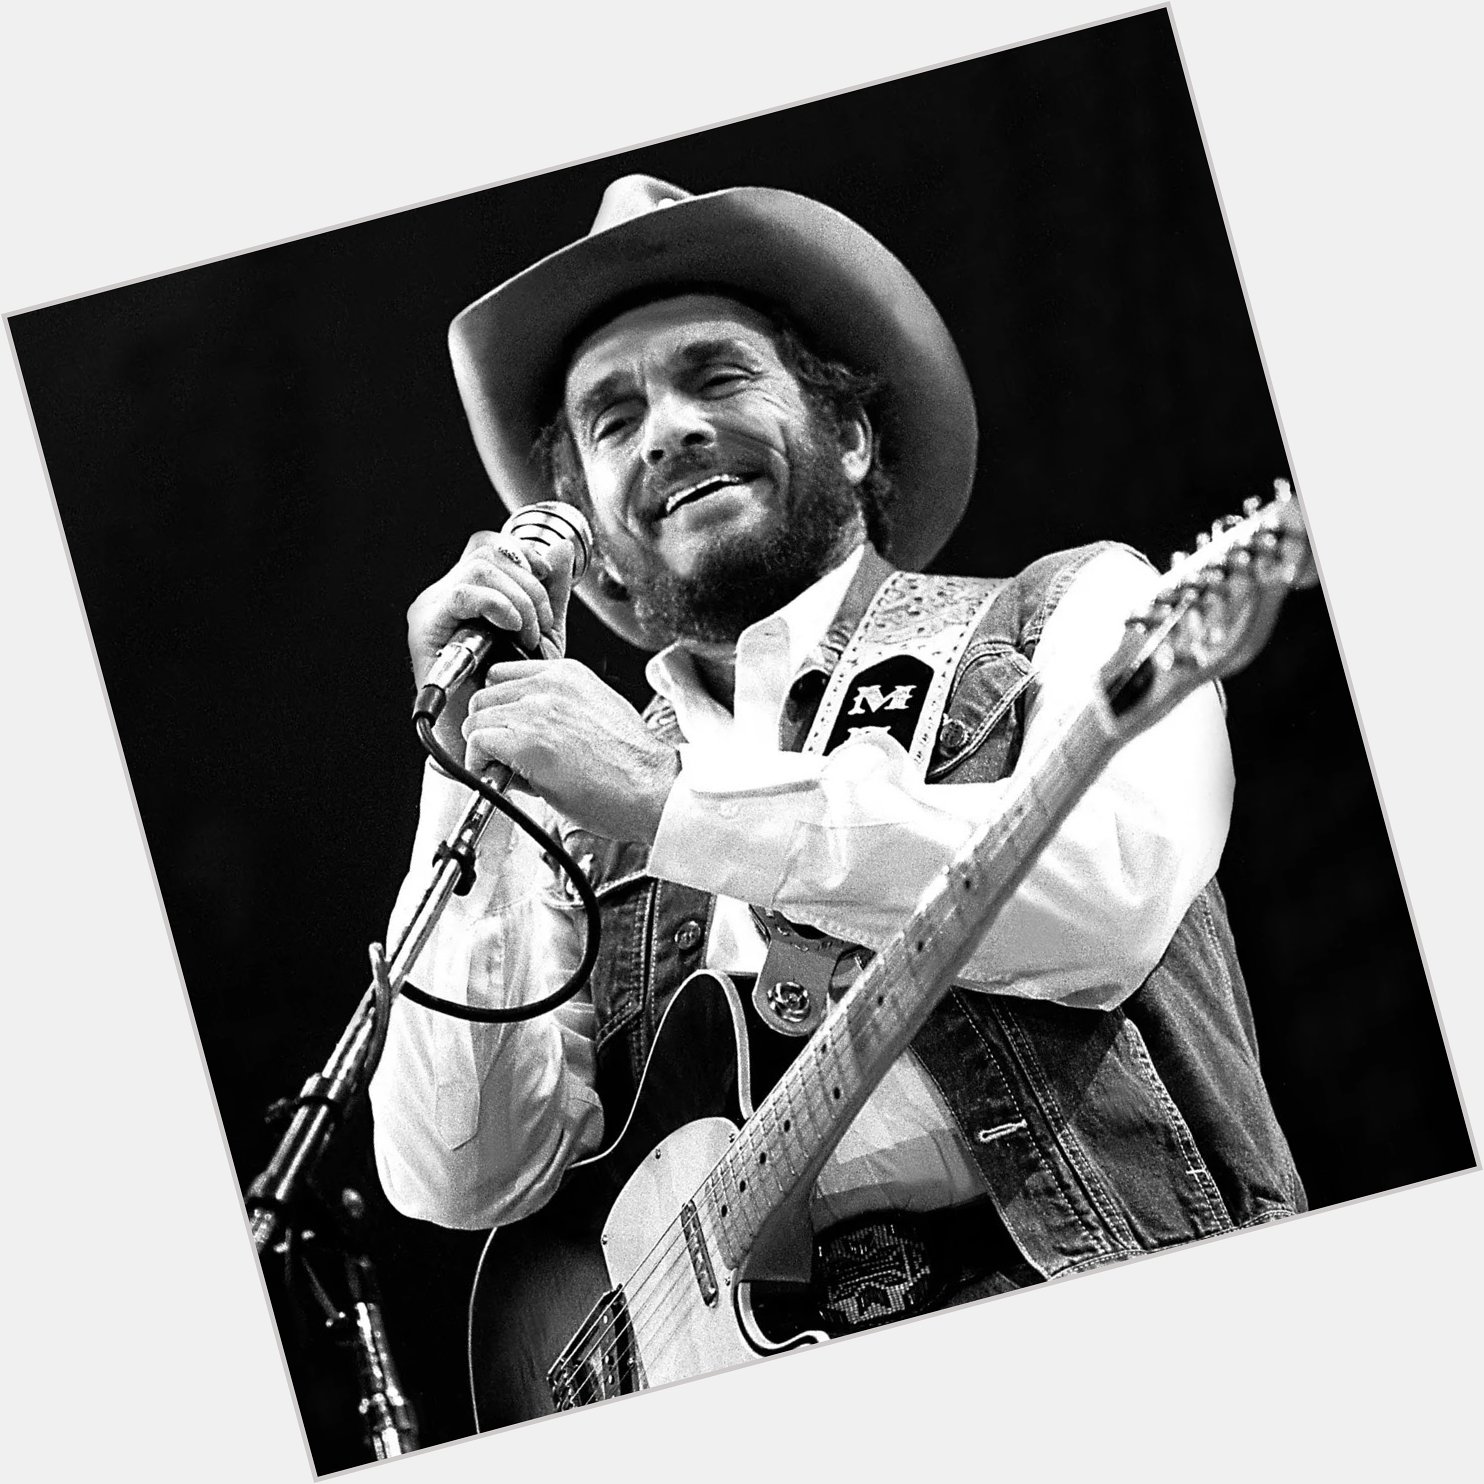 Happy Birthday to the late great Merle Haggard which also happens to be the same day we lost him 6 years ago today 